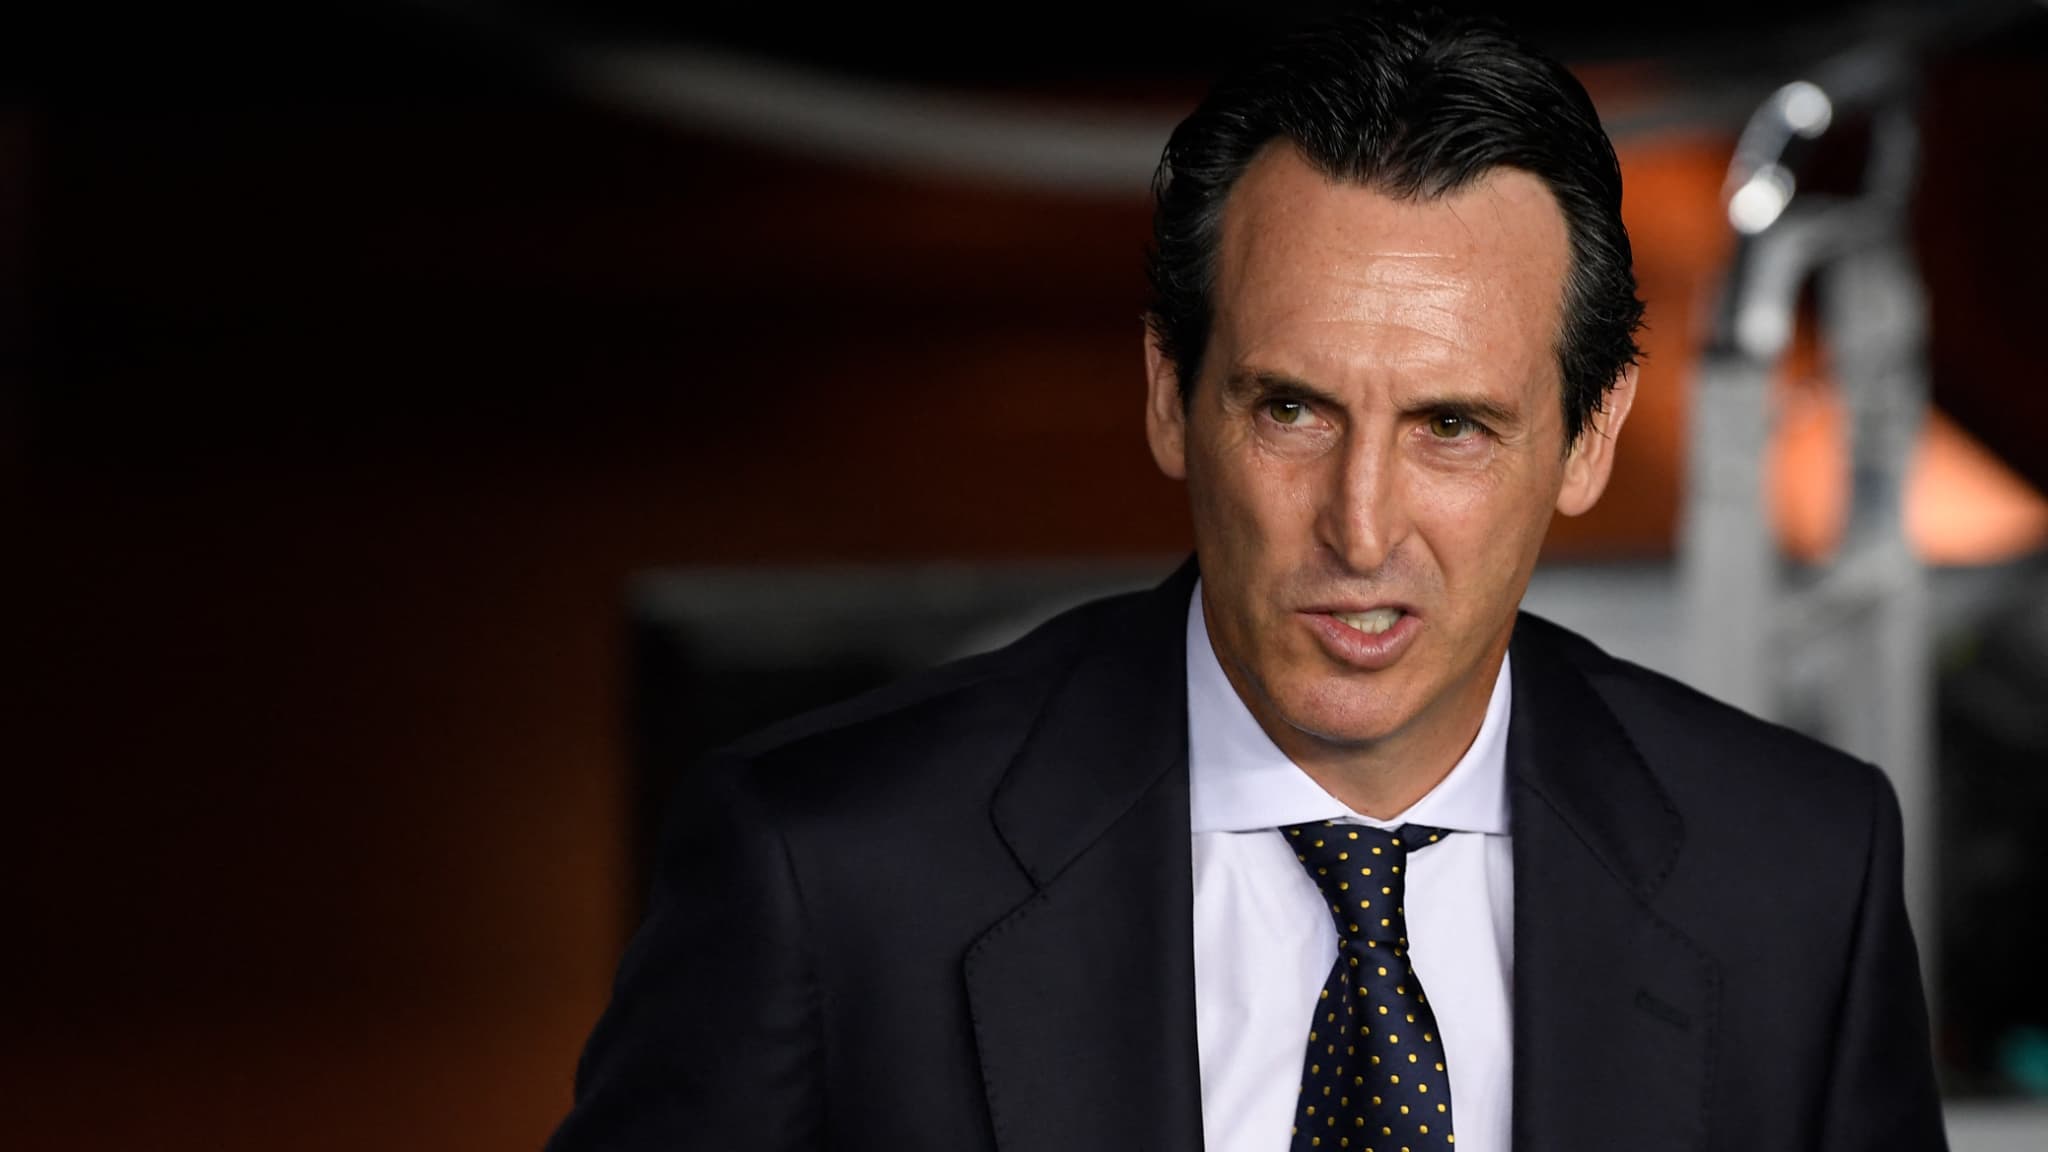 Unai Emery, who was ridiculed for his accent, thanks his English for Peaky Blinders